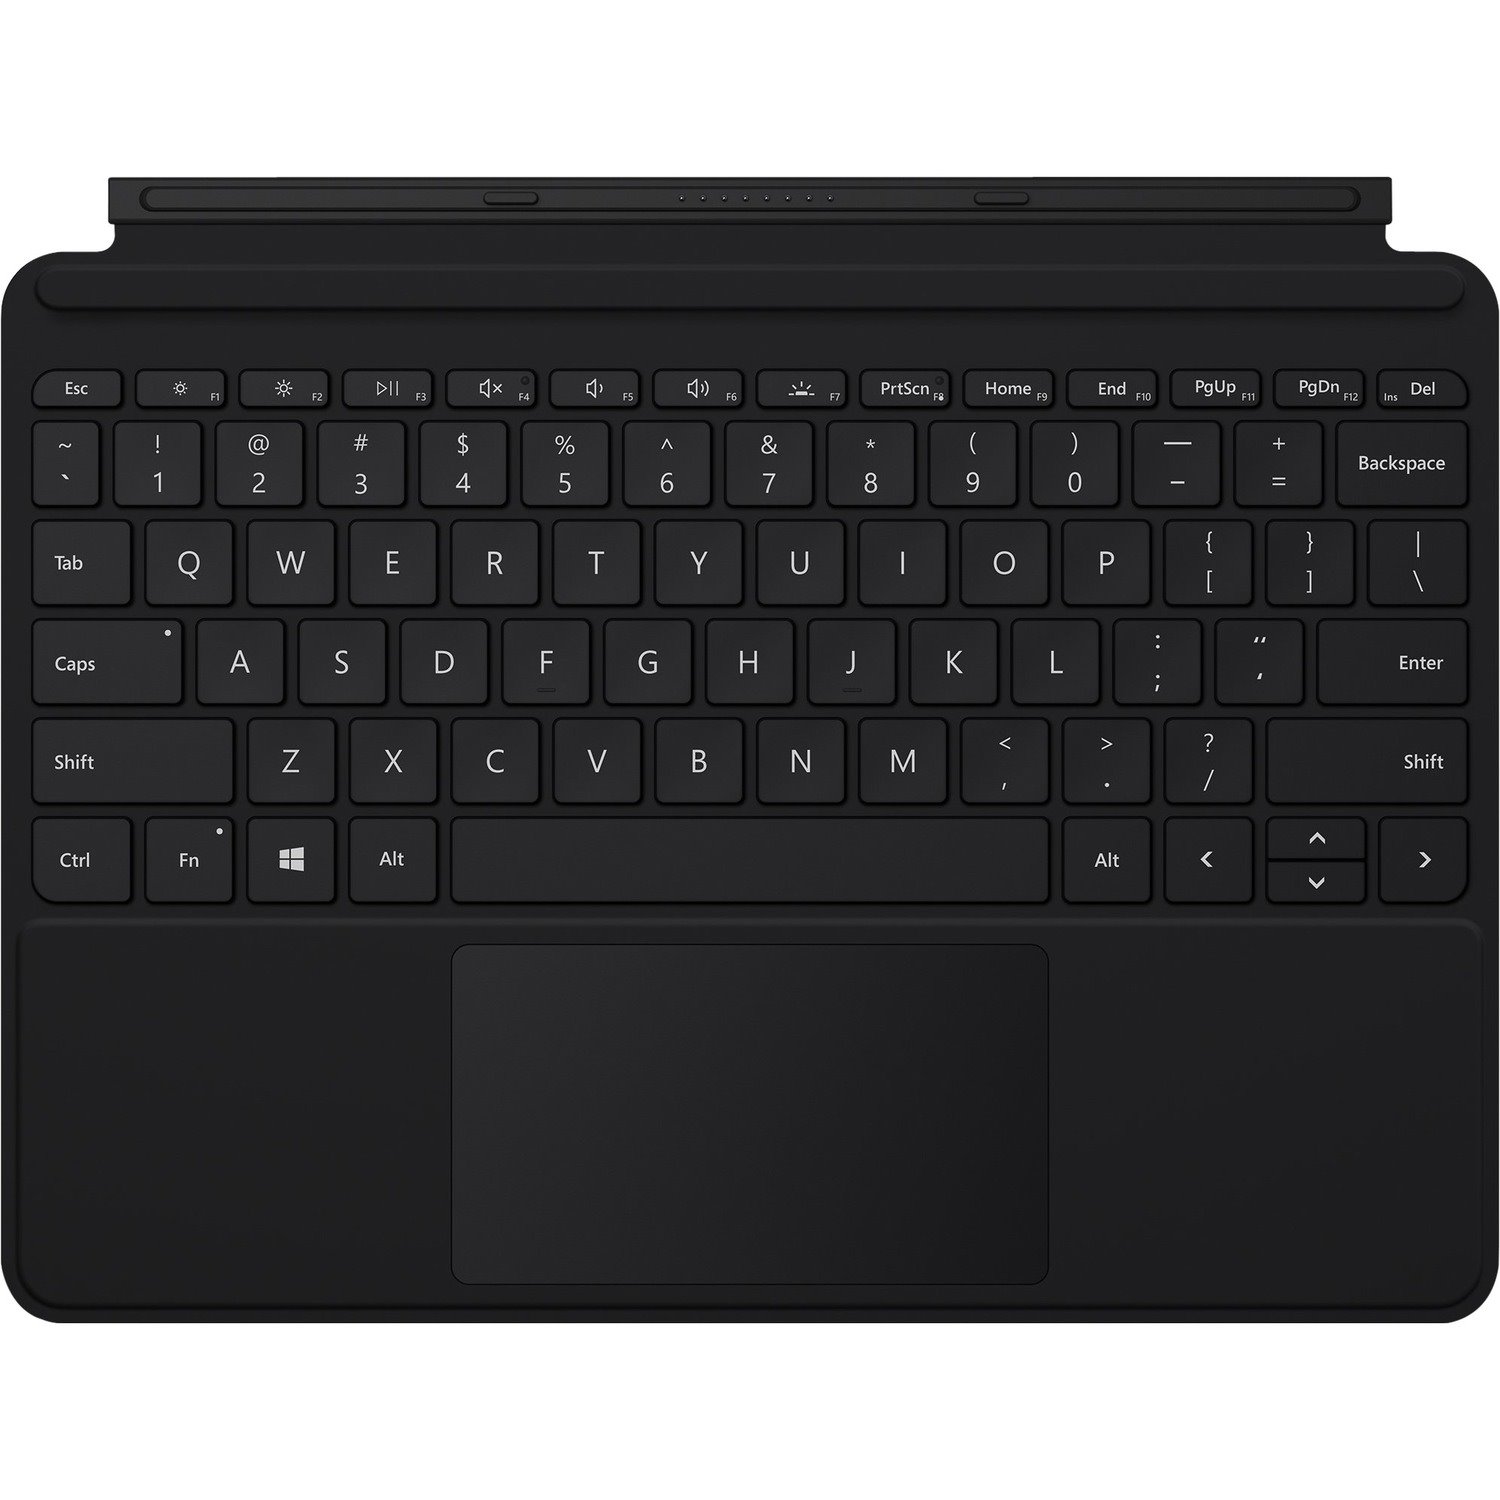 Microsoft Type Cover Keyboard/Cover Case Microsoft Surface Go 2 & 3, Surface Go Tablet - Black